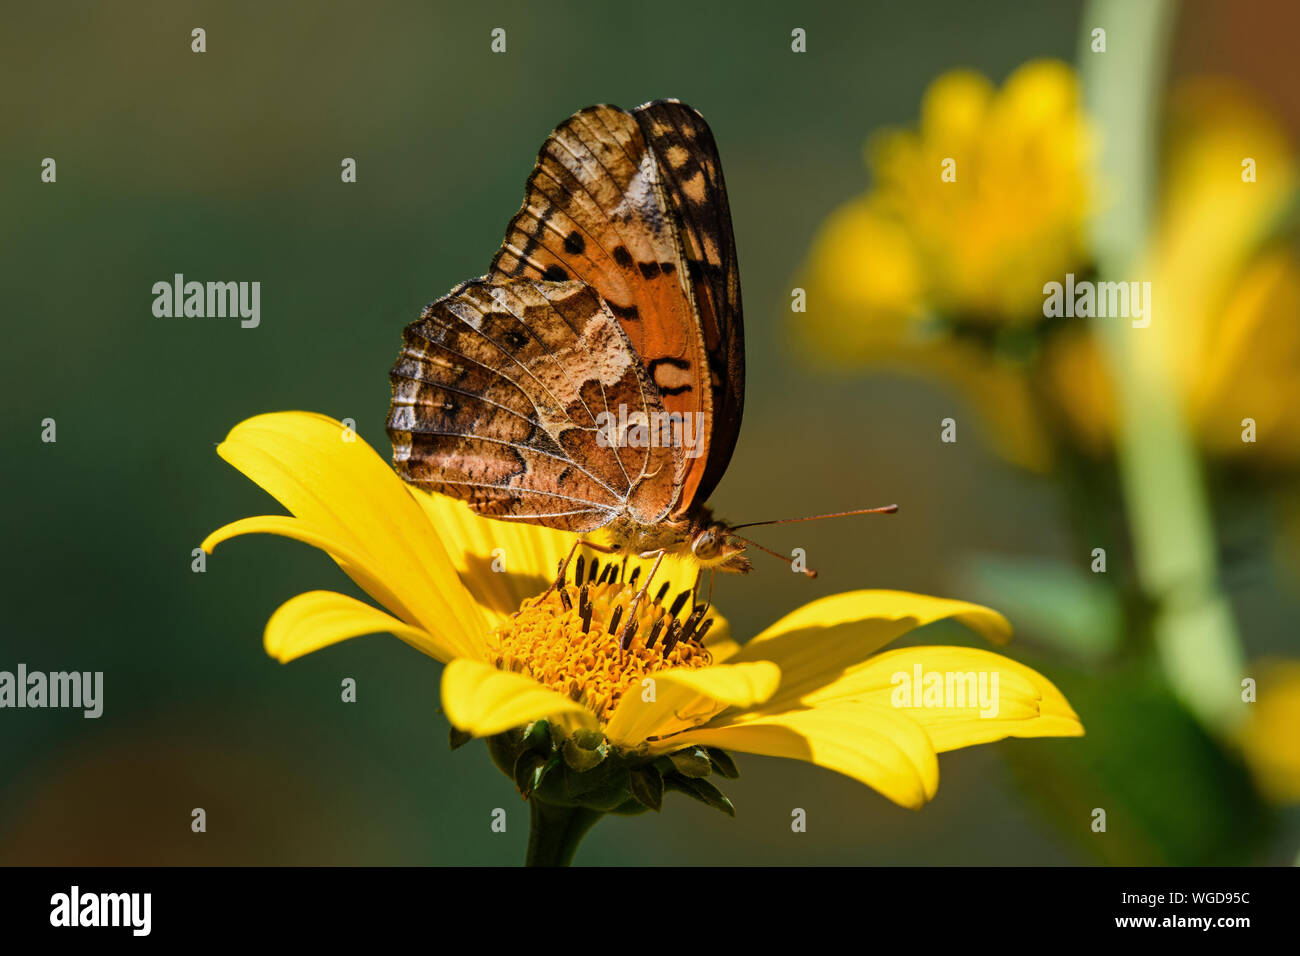 Euptoieta Claudia or variegated fritillary on perennial sunflower. It is a North and South American butterfly in the family Nymphalidae. Stock Photo